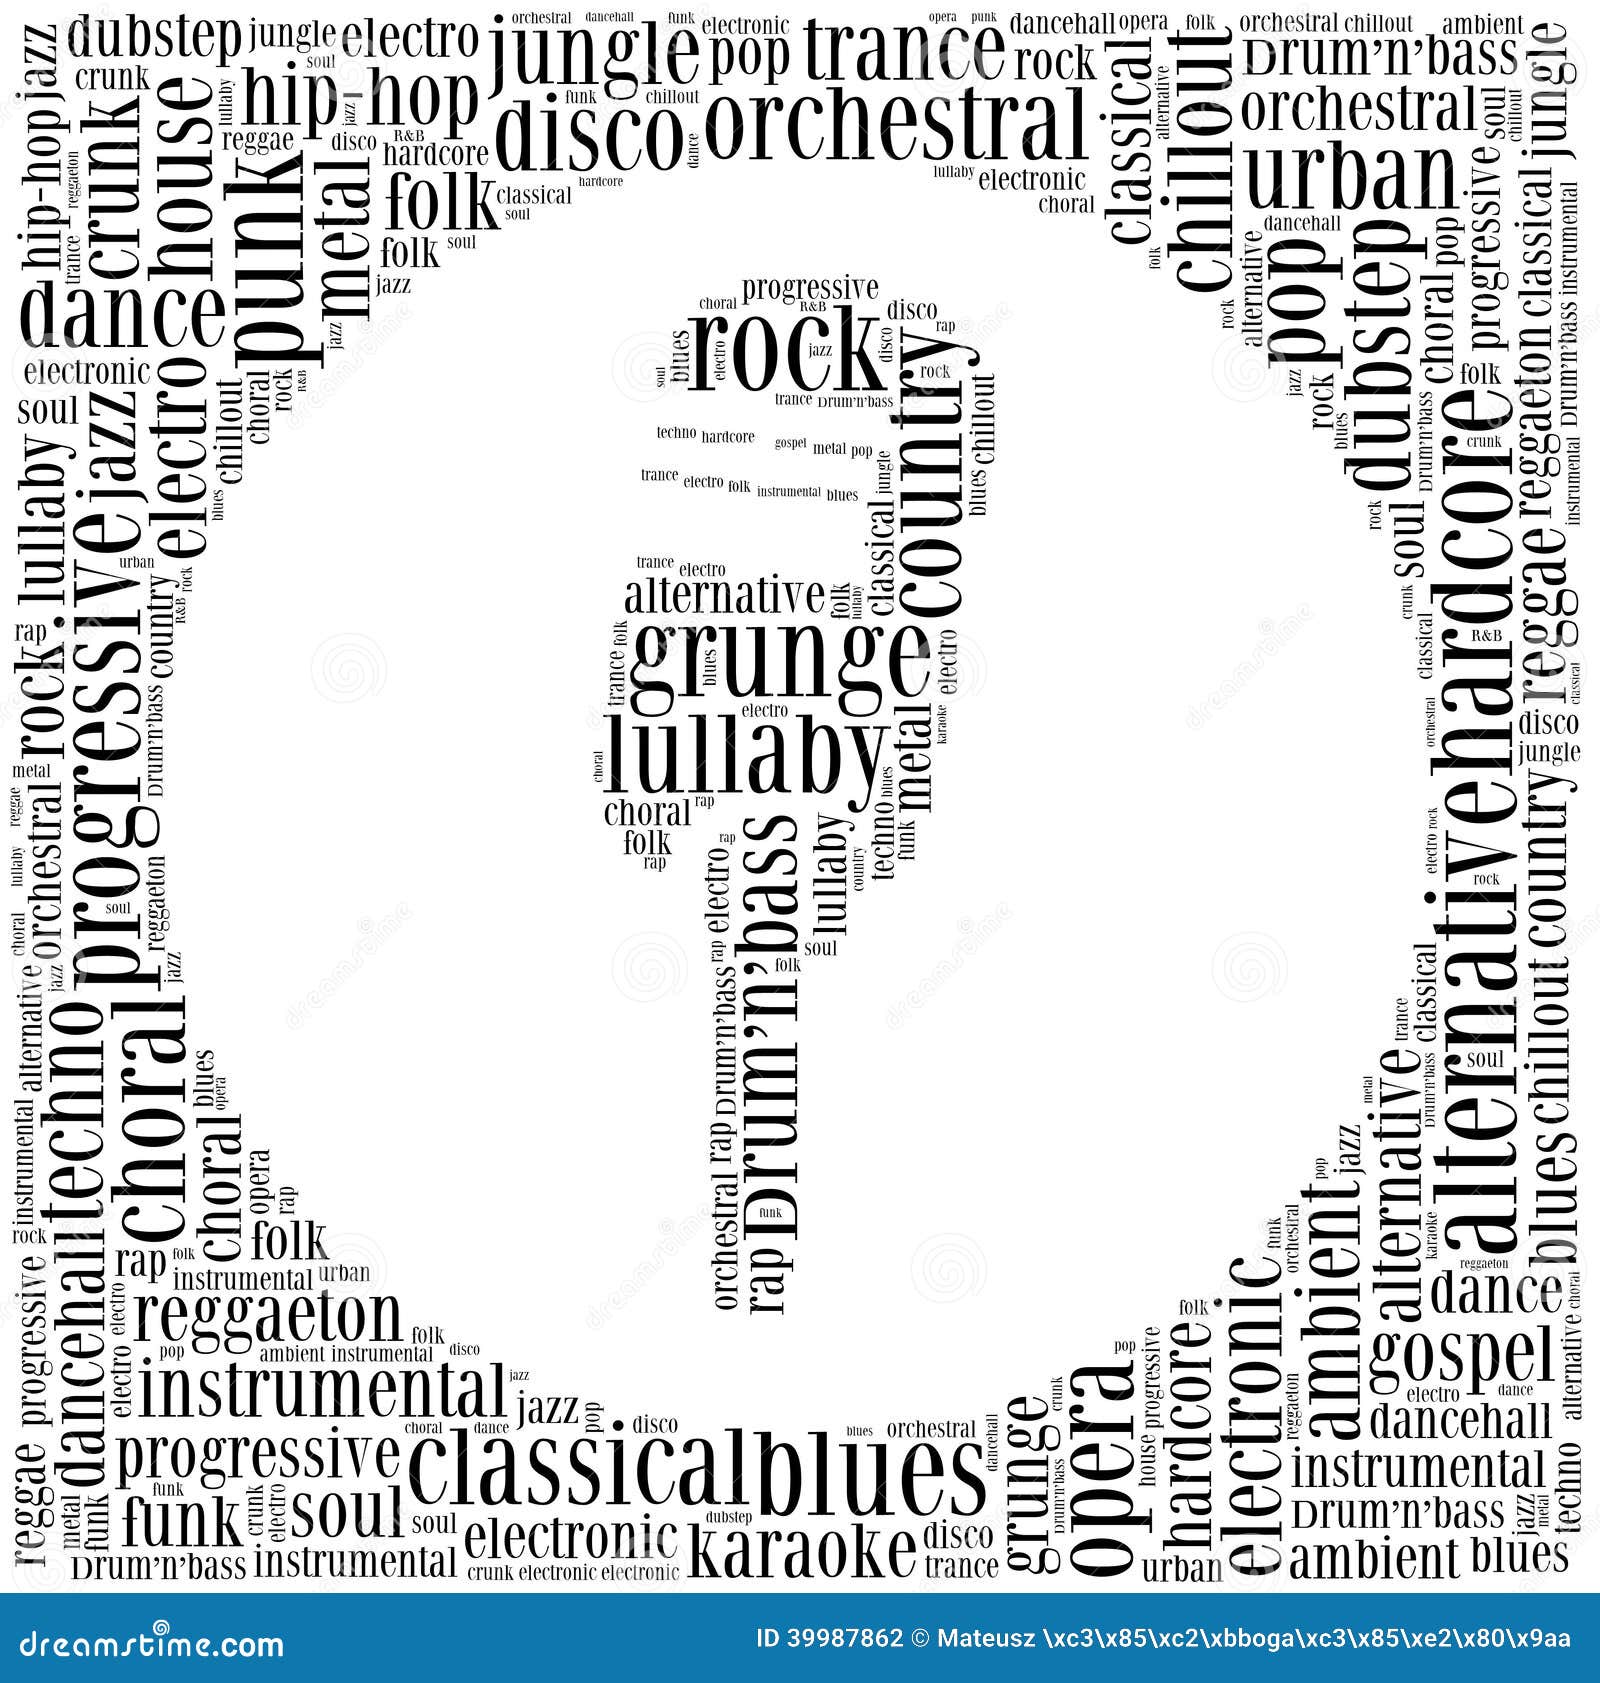 word cloud concept of music genres